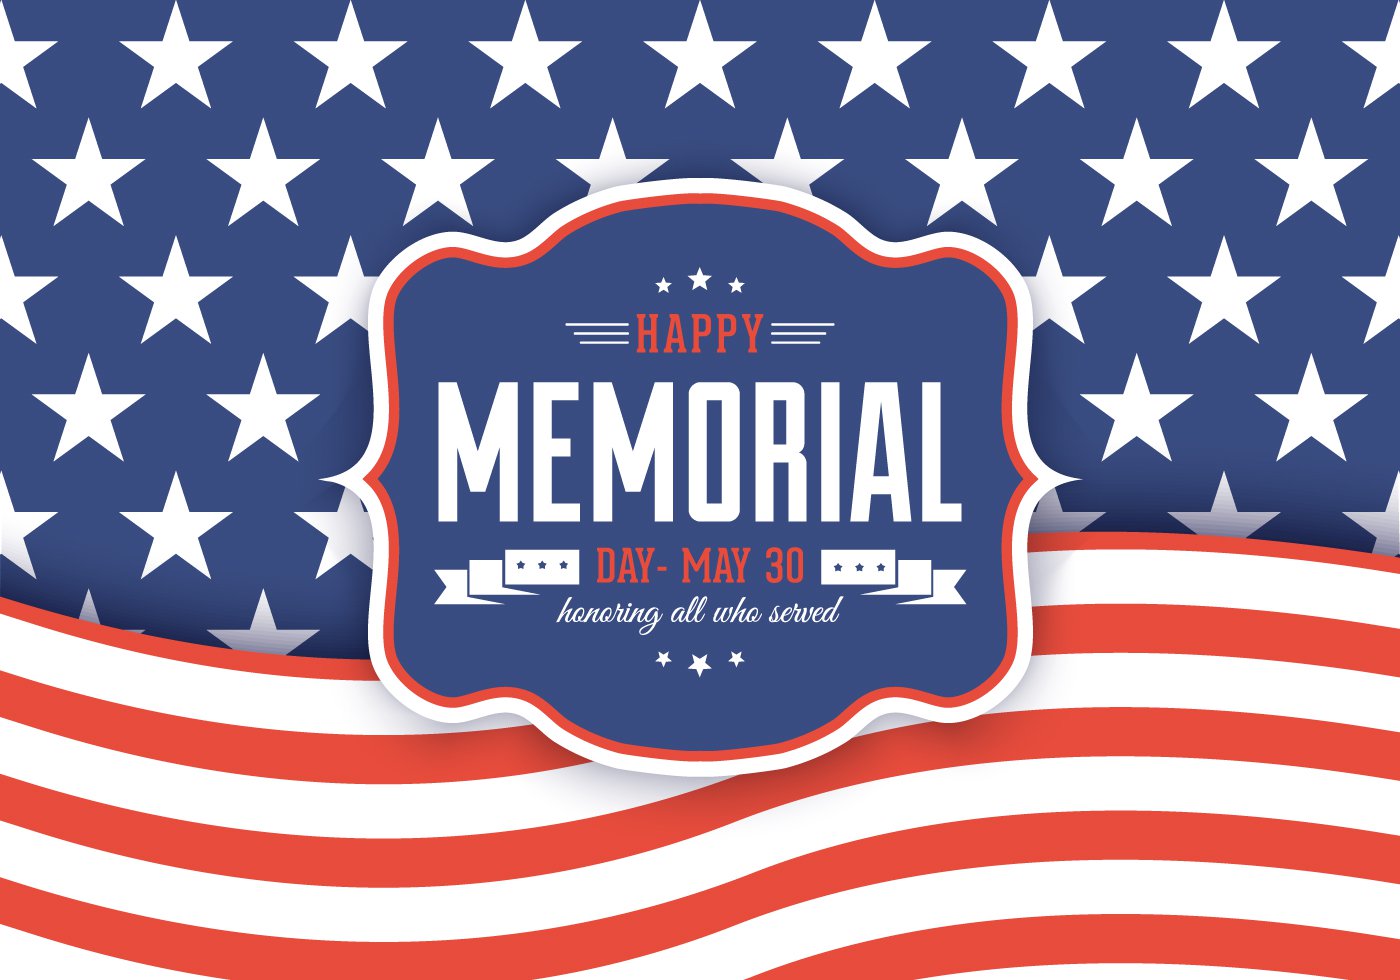 Gallery For Gt Happy Memorial Day Background